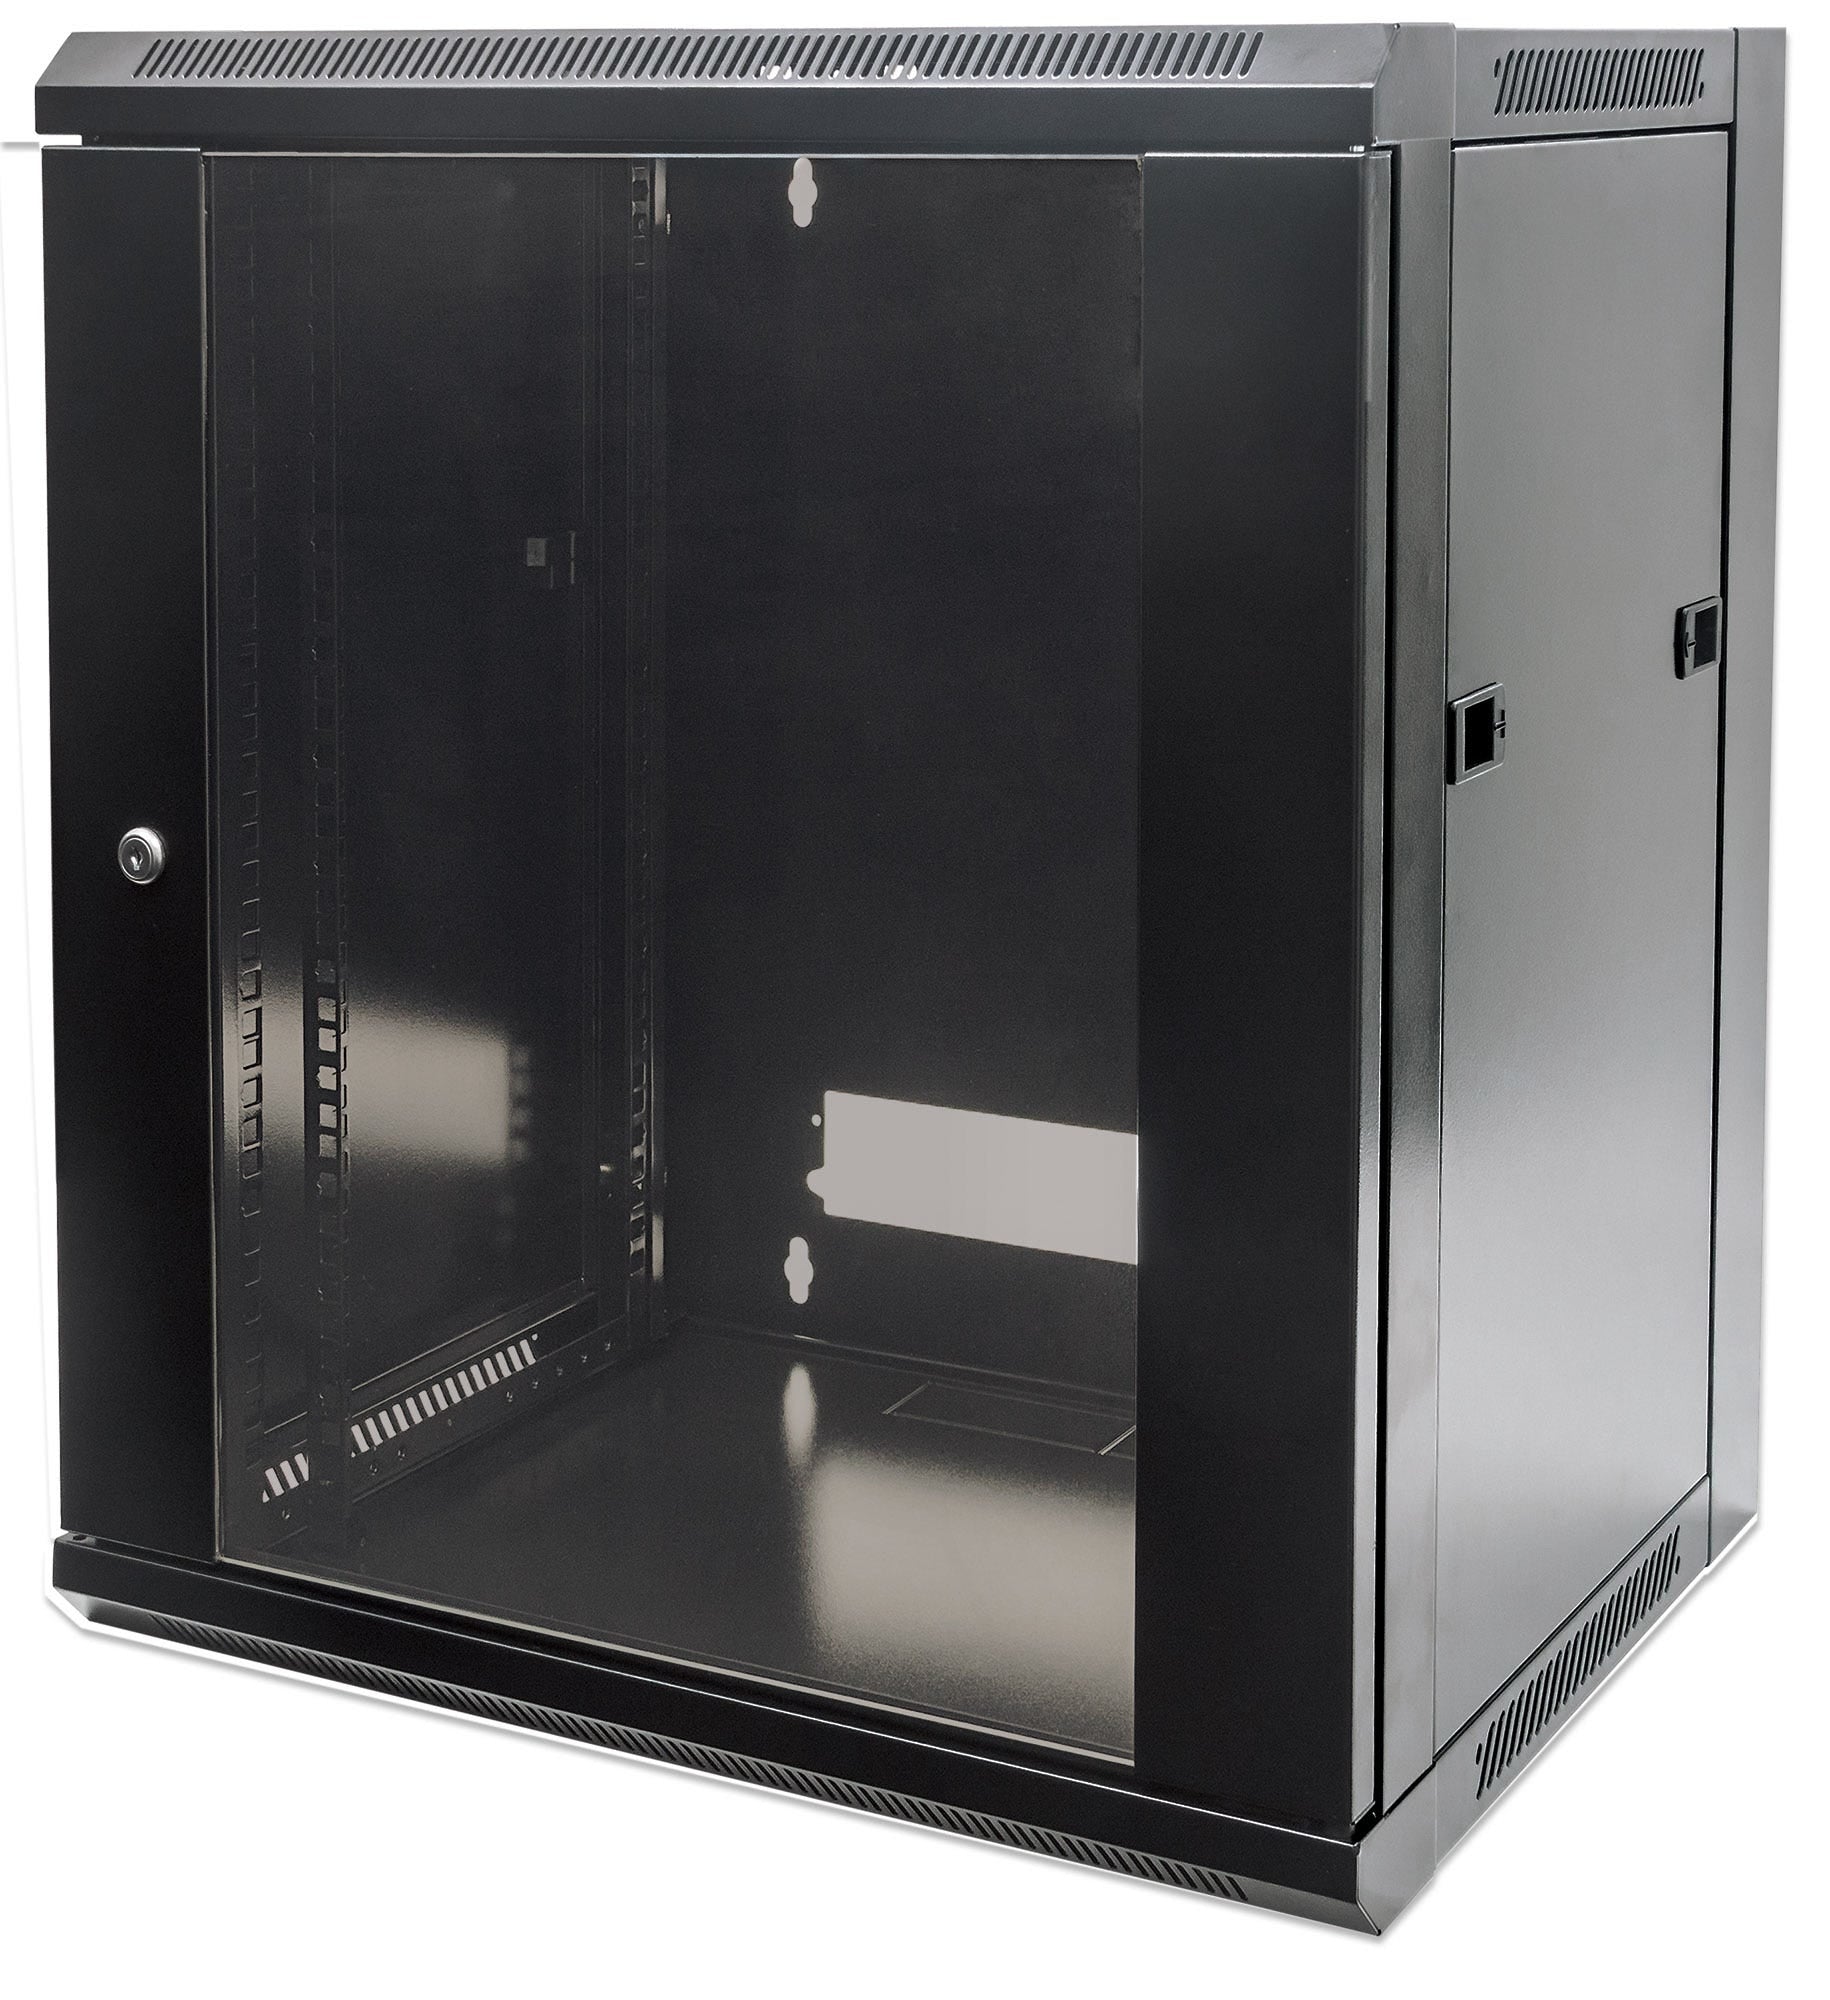 Intellinet Network Cabinet, Wall Mount (Standard), 9U, Usable Depth 410mm/Width 510mm, Black, Flatpack, Max 60kg, Metal & Glass Door, Back Panel, Removeable Sides, Suitable also for use on desk or floor, 19",Parts for wall install (eg screws/rawl plugs) n